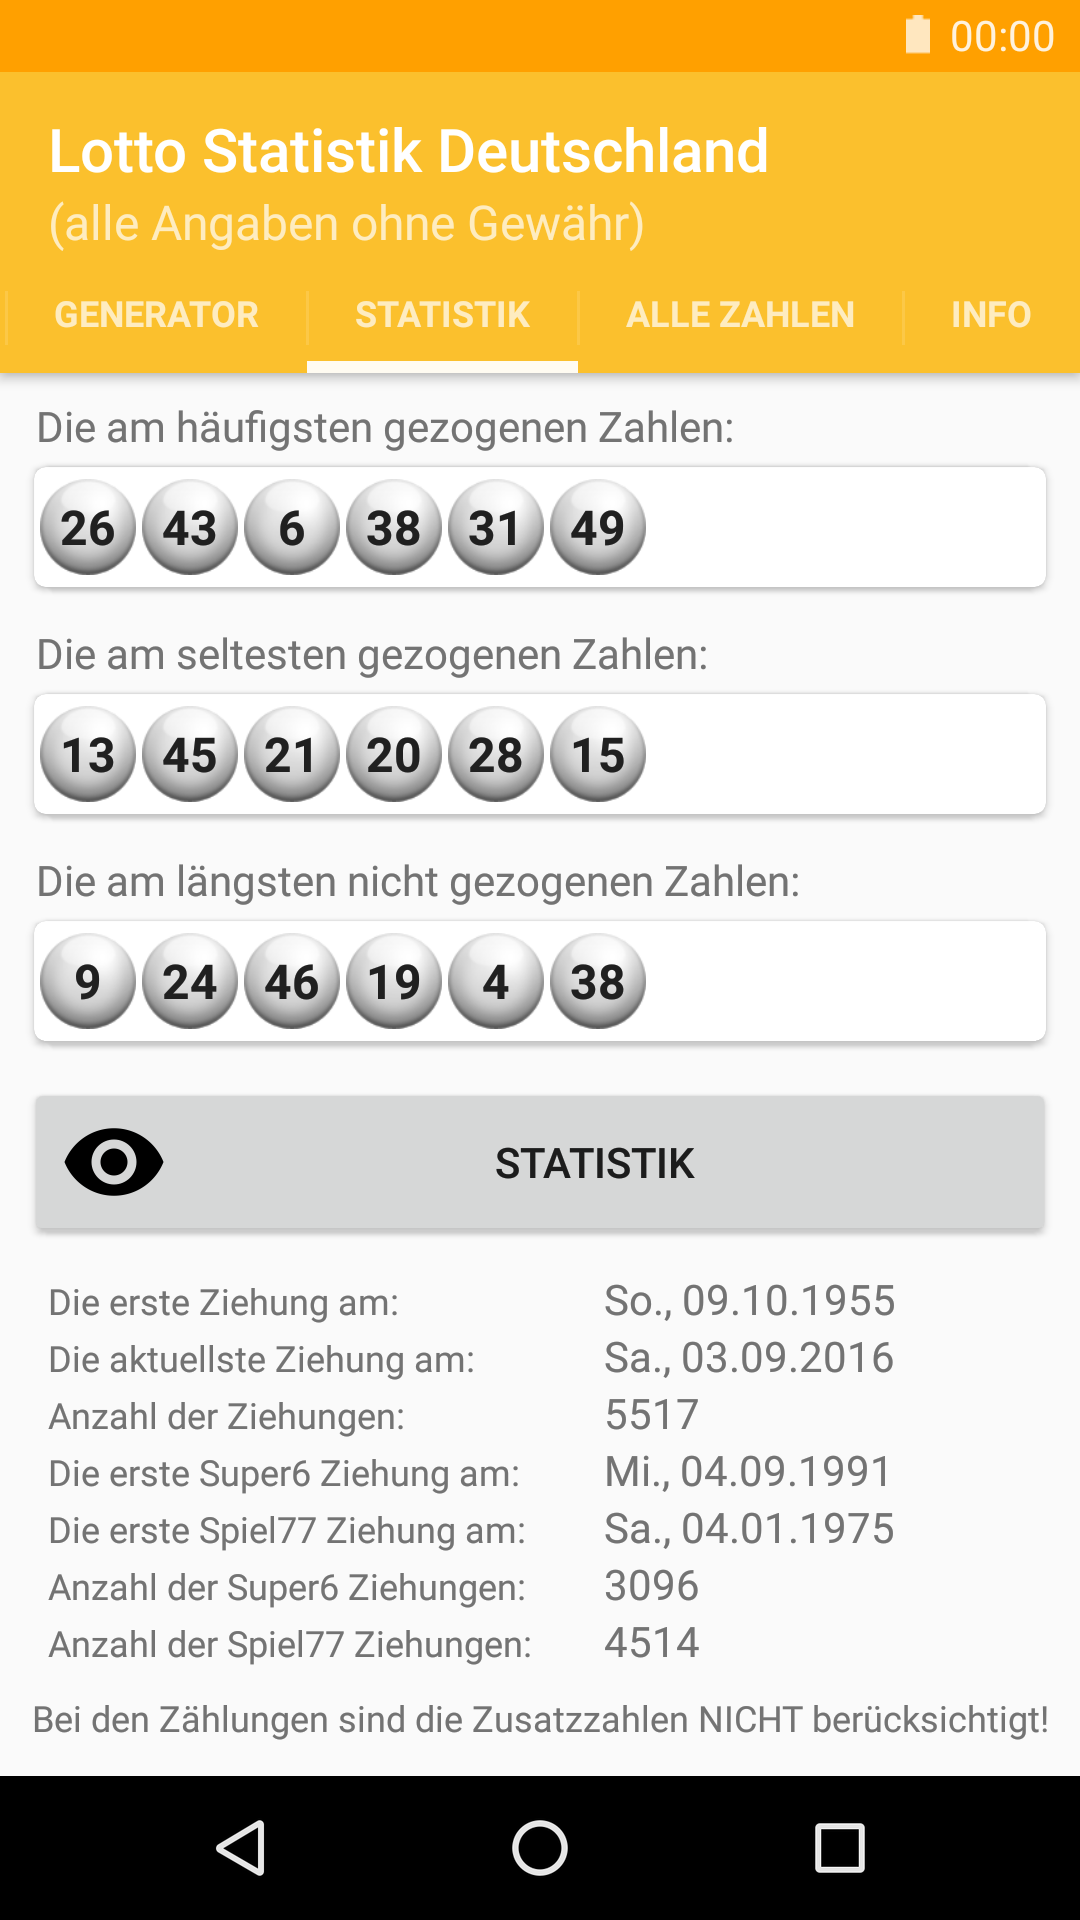 Lotto Statistik Deutschland APK 1.5.8 for Android – Download Lotto  Statistik Deutschland APK Latest Version from APKFab.com